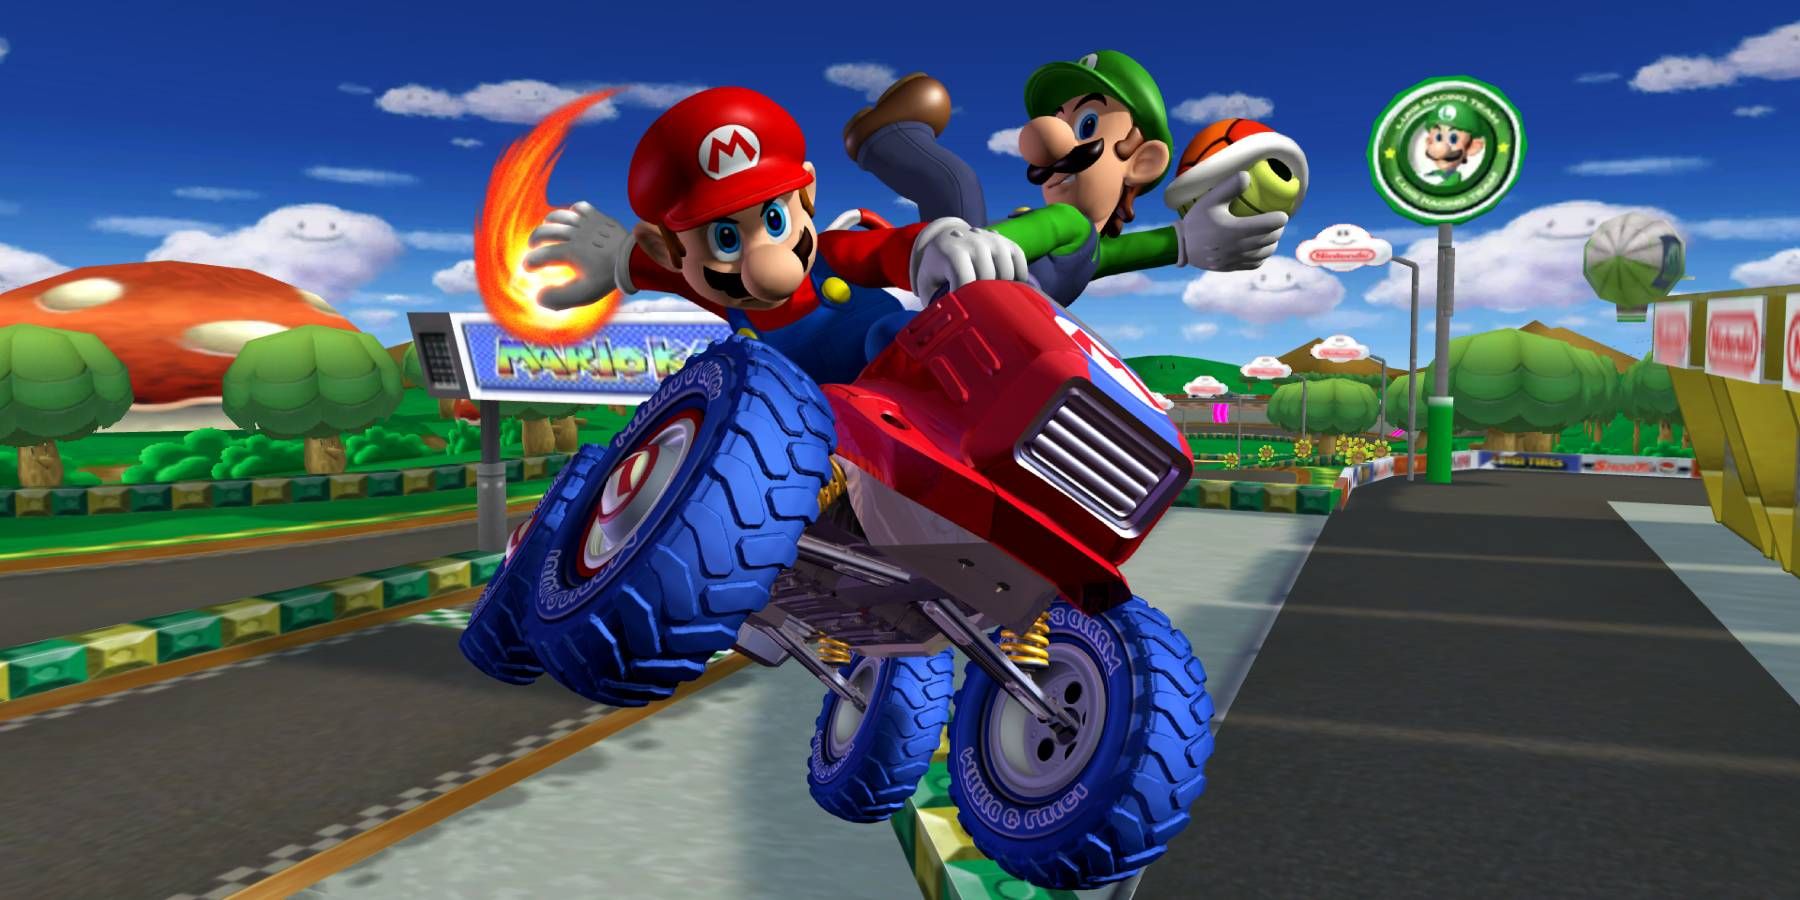 Mario and Luigi in the Red Fire on Luigi Circuit from Mario Kart: Double Dash